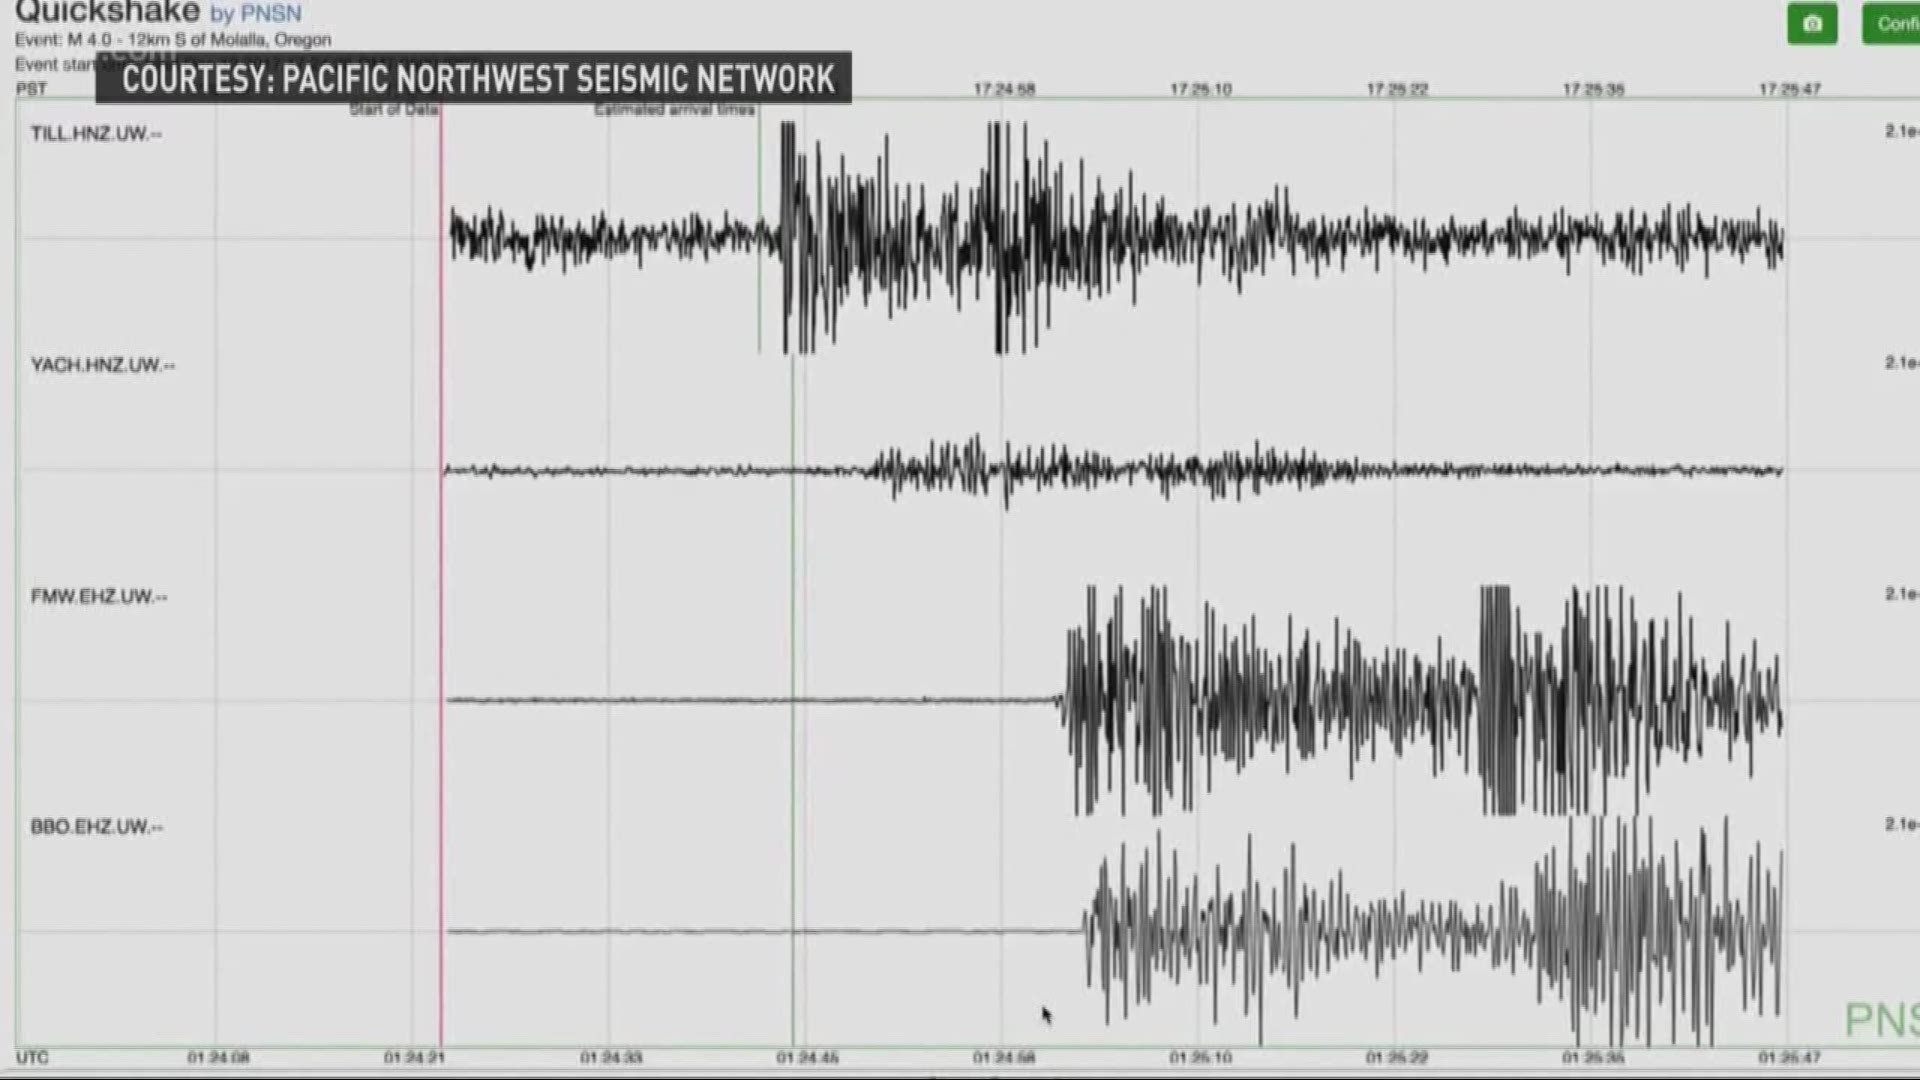 911 dispatchers in Clackamas County were swamped with calls after a small quake near Molalla. Officials ask people to only call 911 if there's an actual emergency.